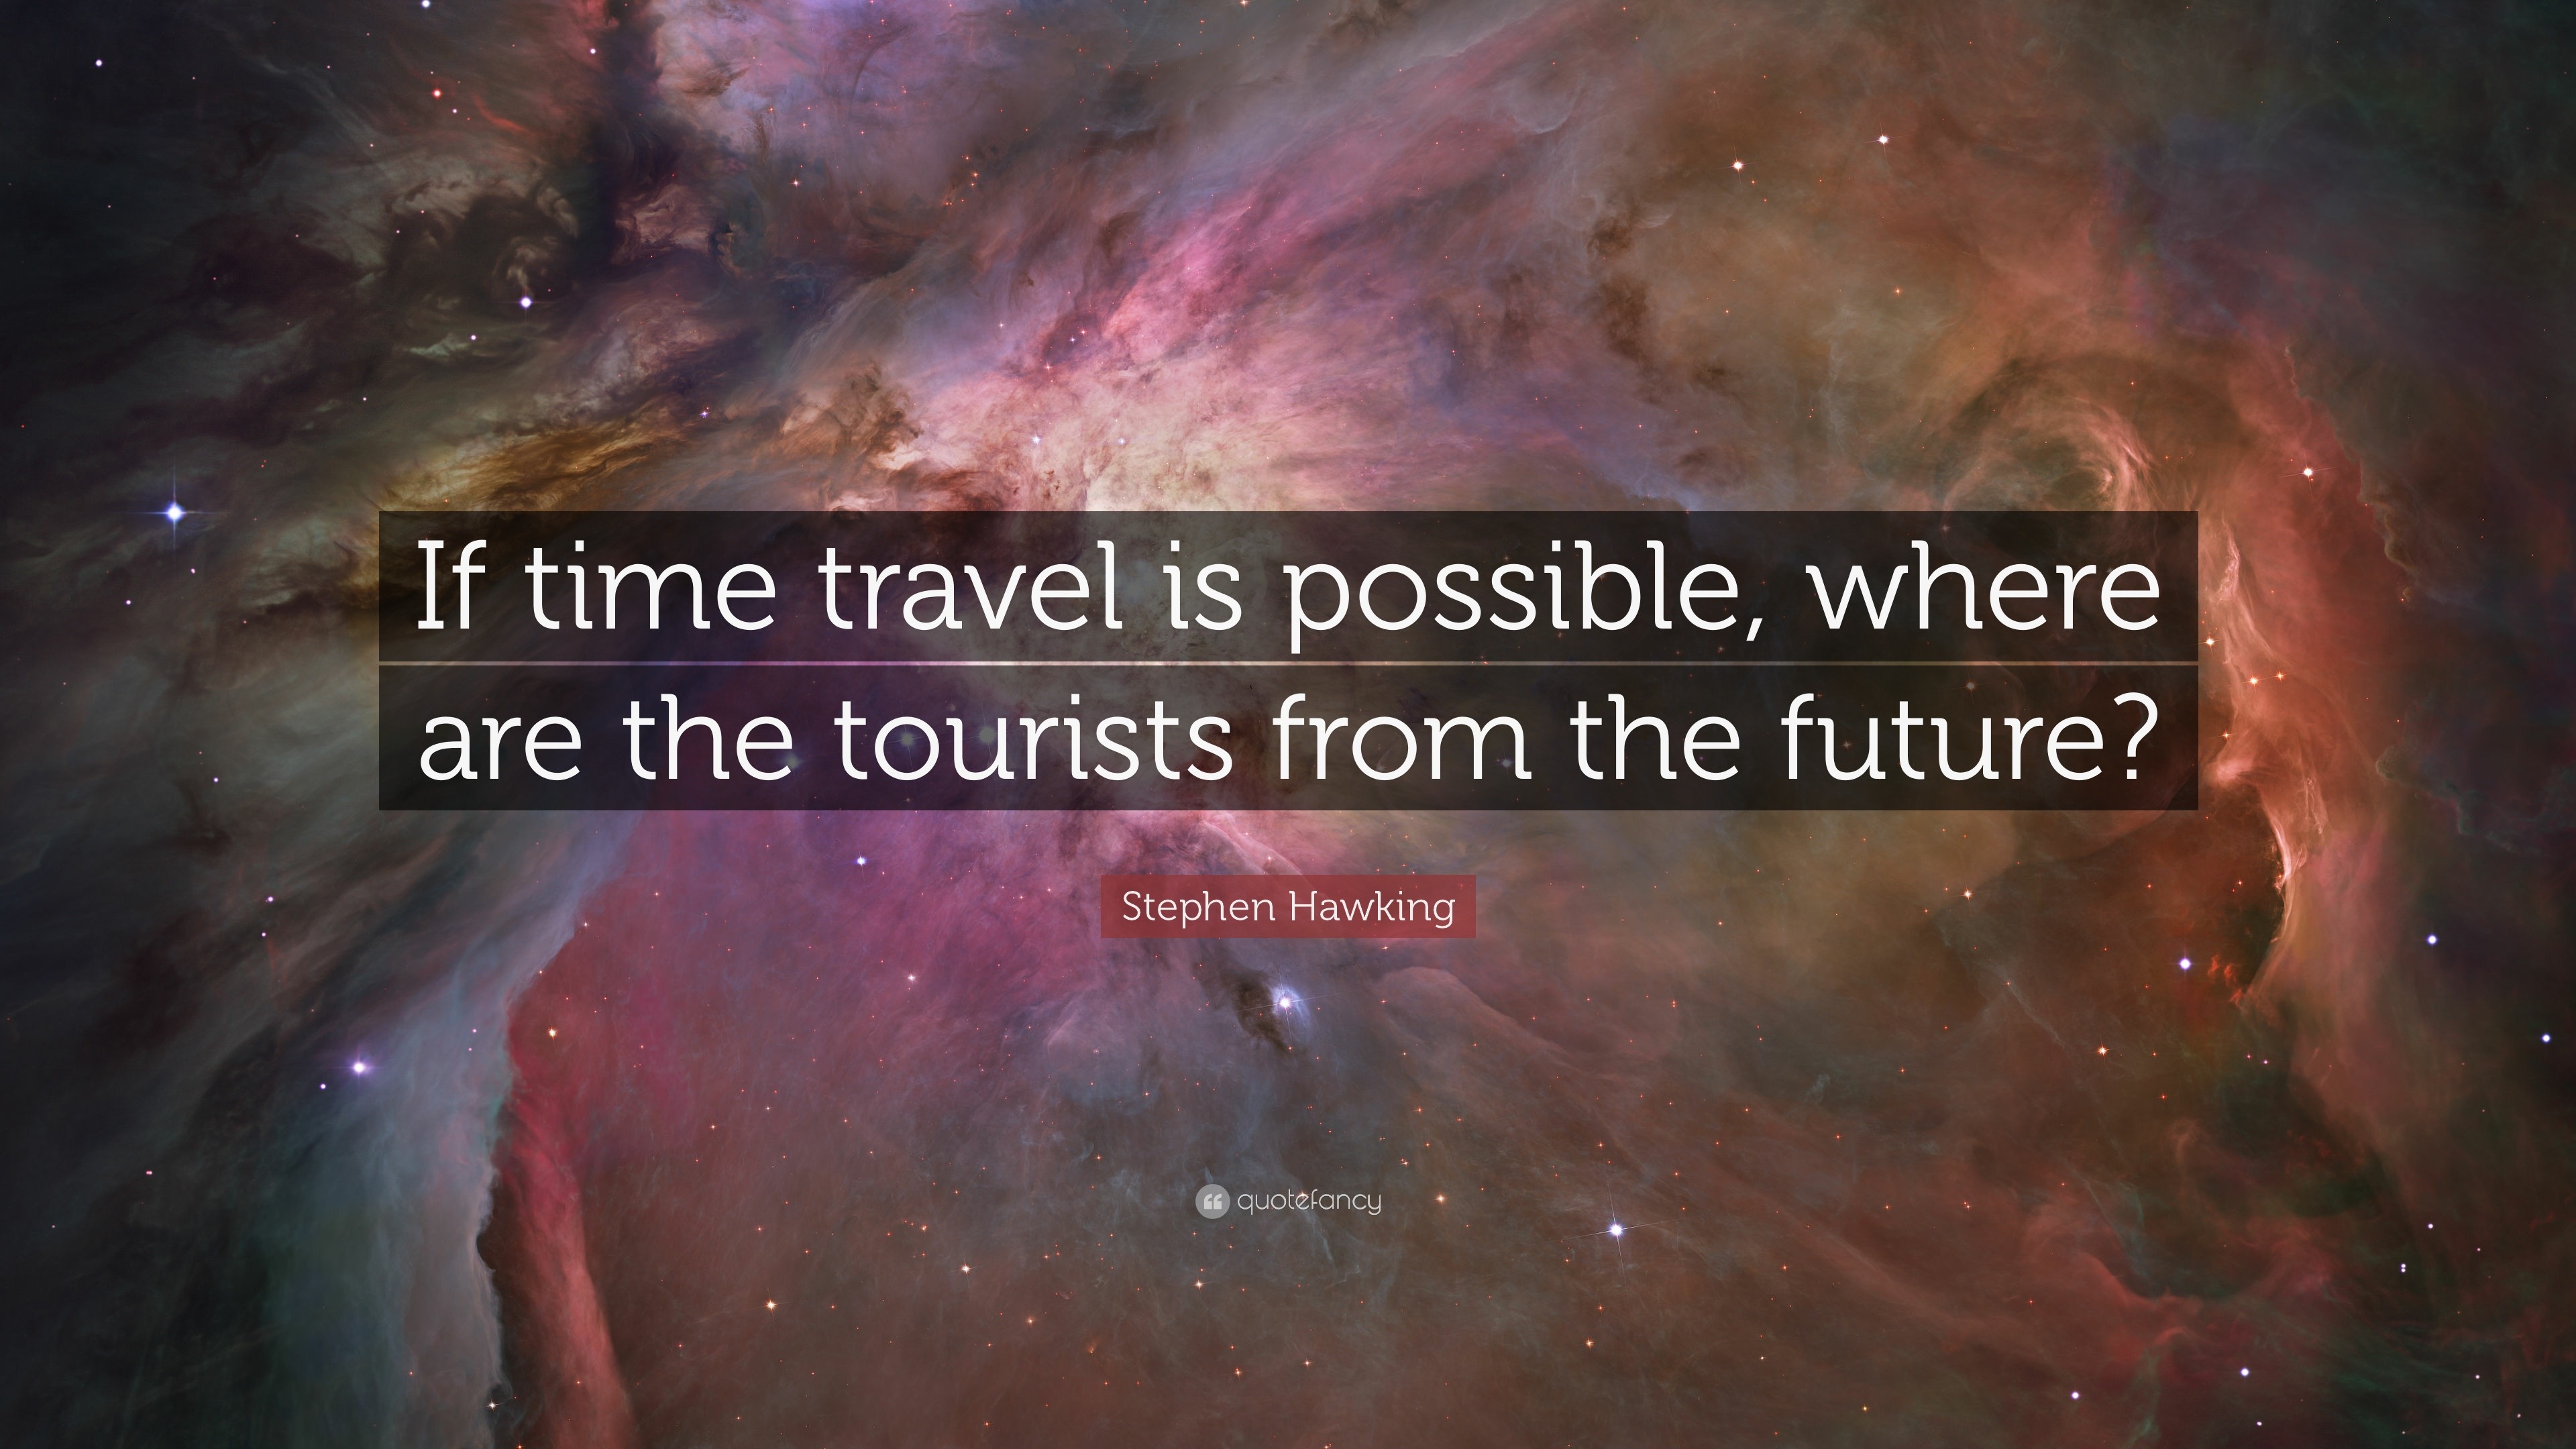 is a time travel possible